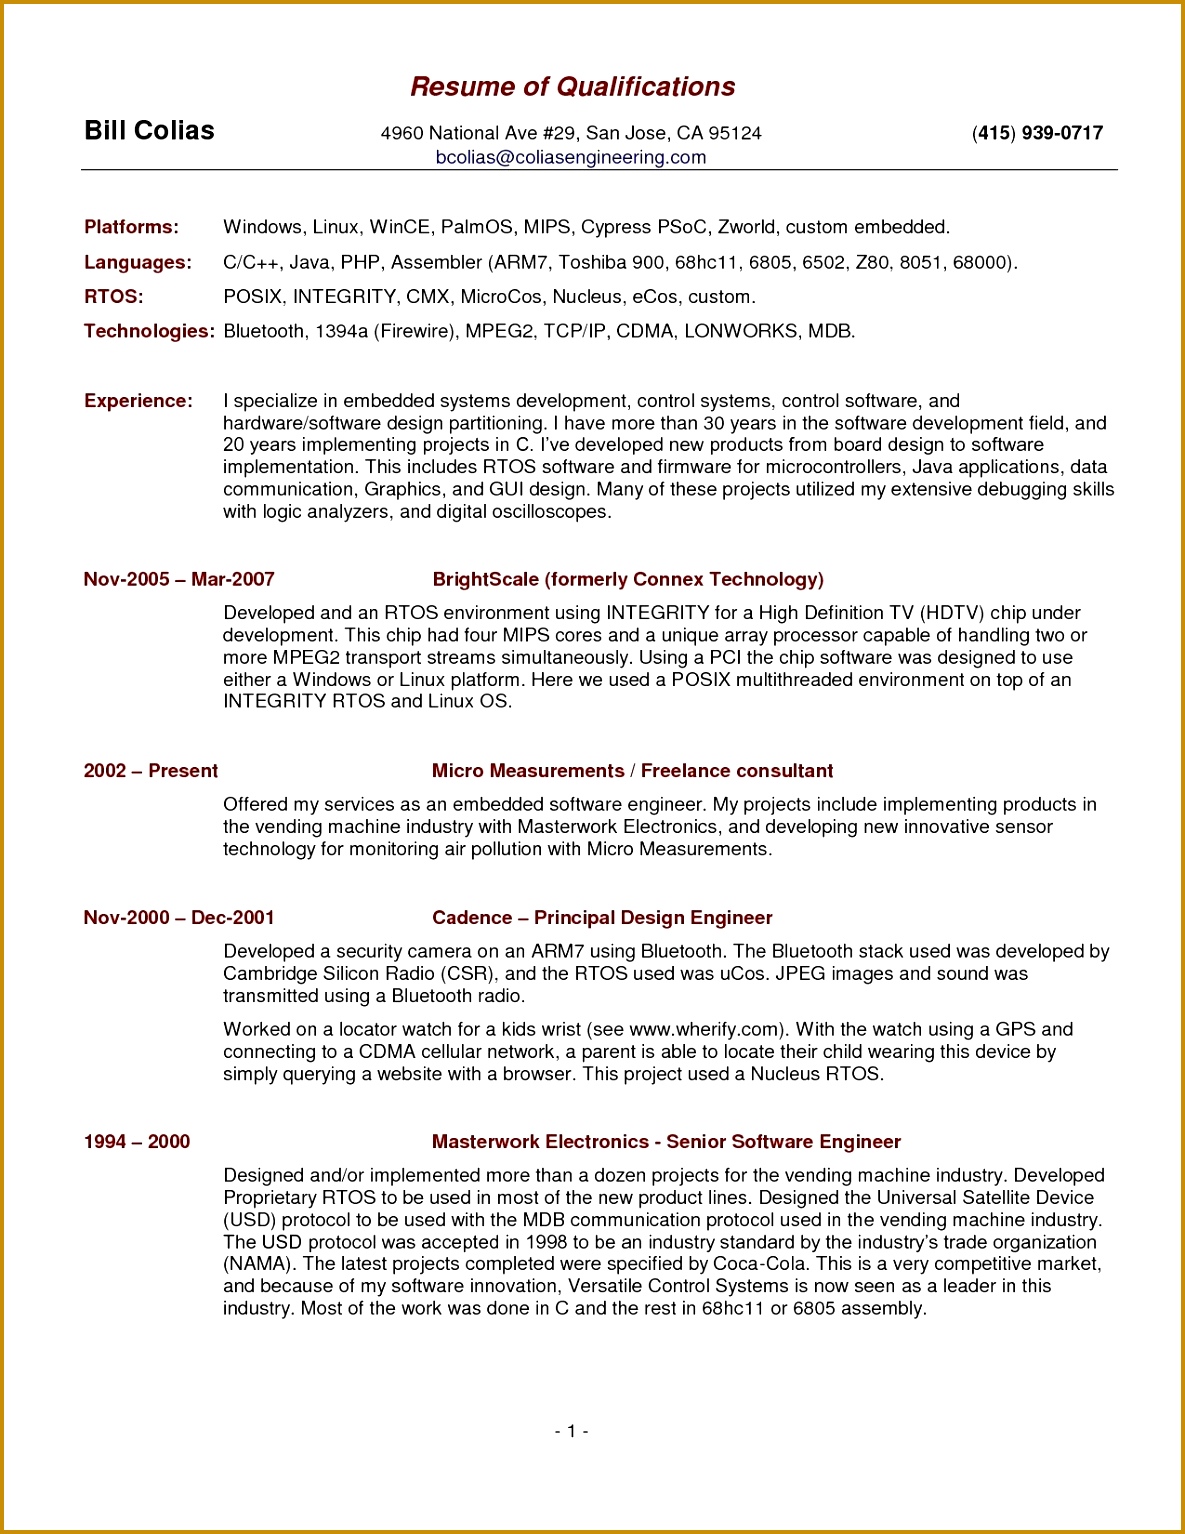 Proffesional Resume Best New Resume Tem Lovely Resume Letter Best Formatted Resume 0d What 15341185